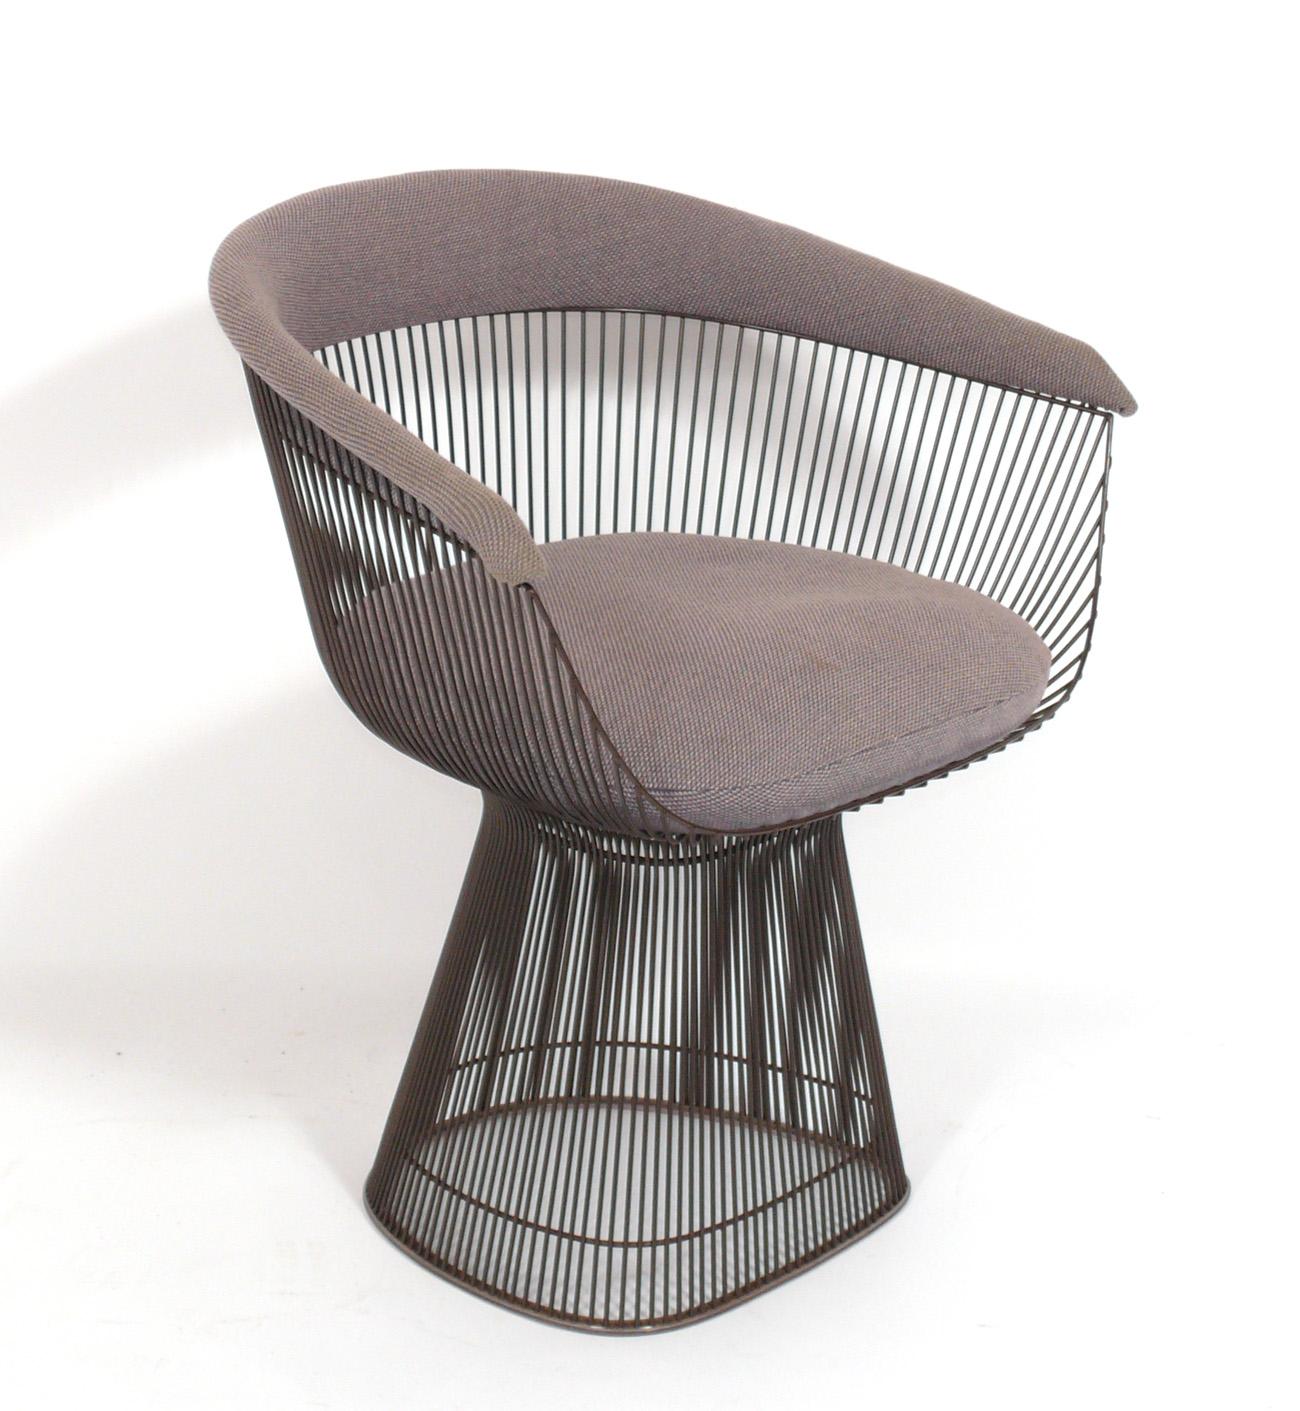 Set of four sculptural dining chairs, designed by Warren Platner for Knoll, American, circa 1960s. Signed with Knoll label. These chairs are currently being reupholstered and can be completed in your fabric. Simply send us 9 yards of your fabric